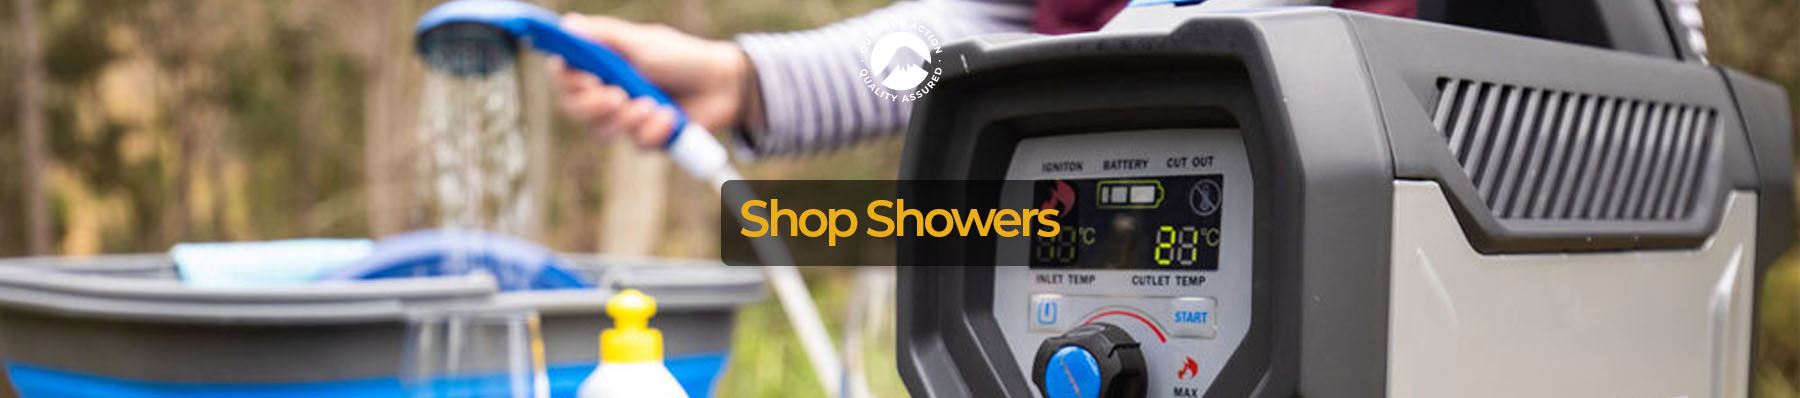 Shop Showers online at Outdoor Action